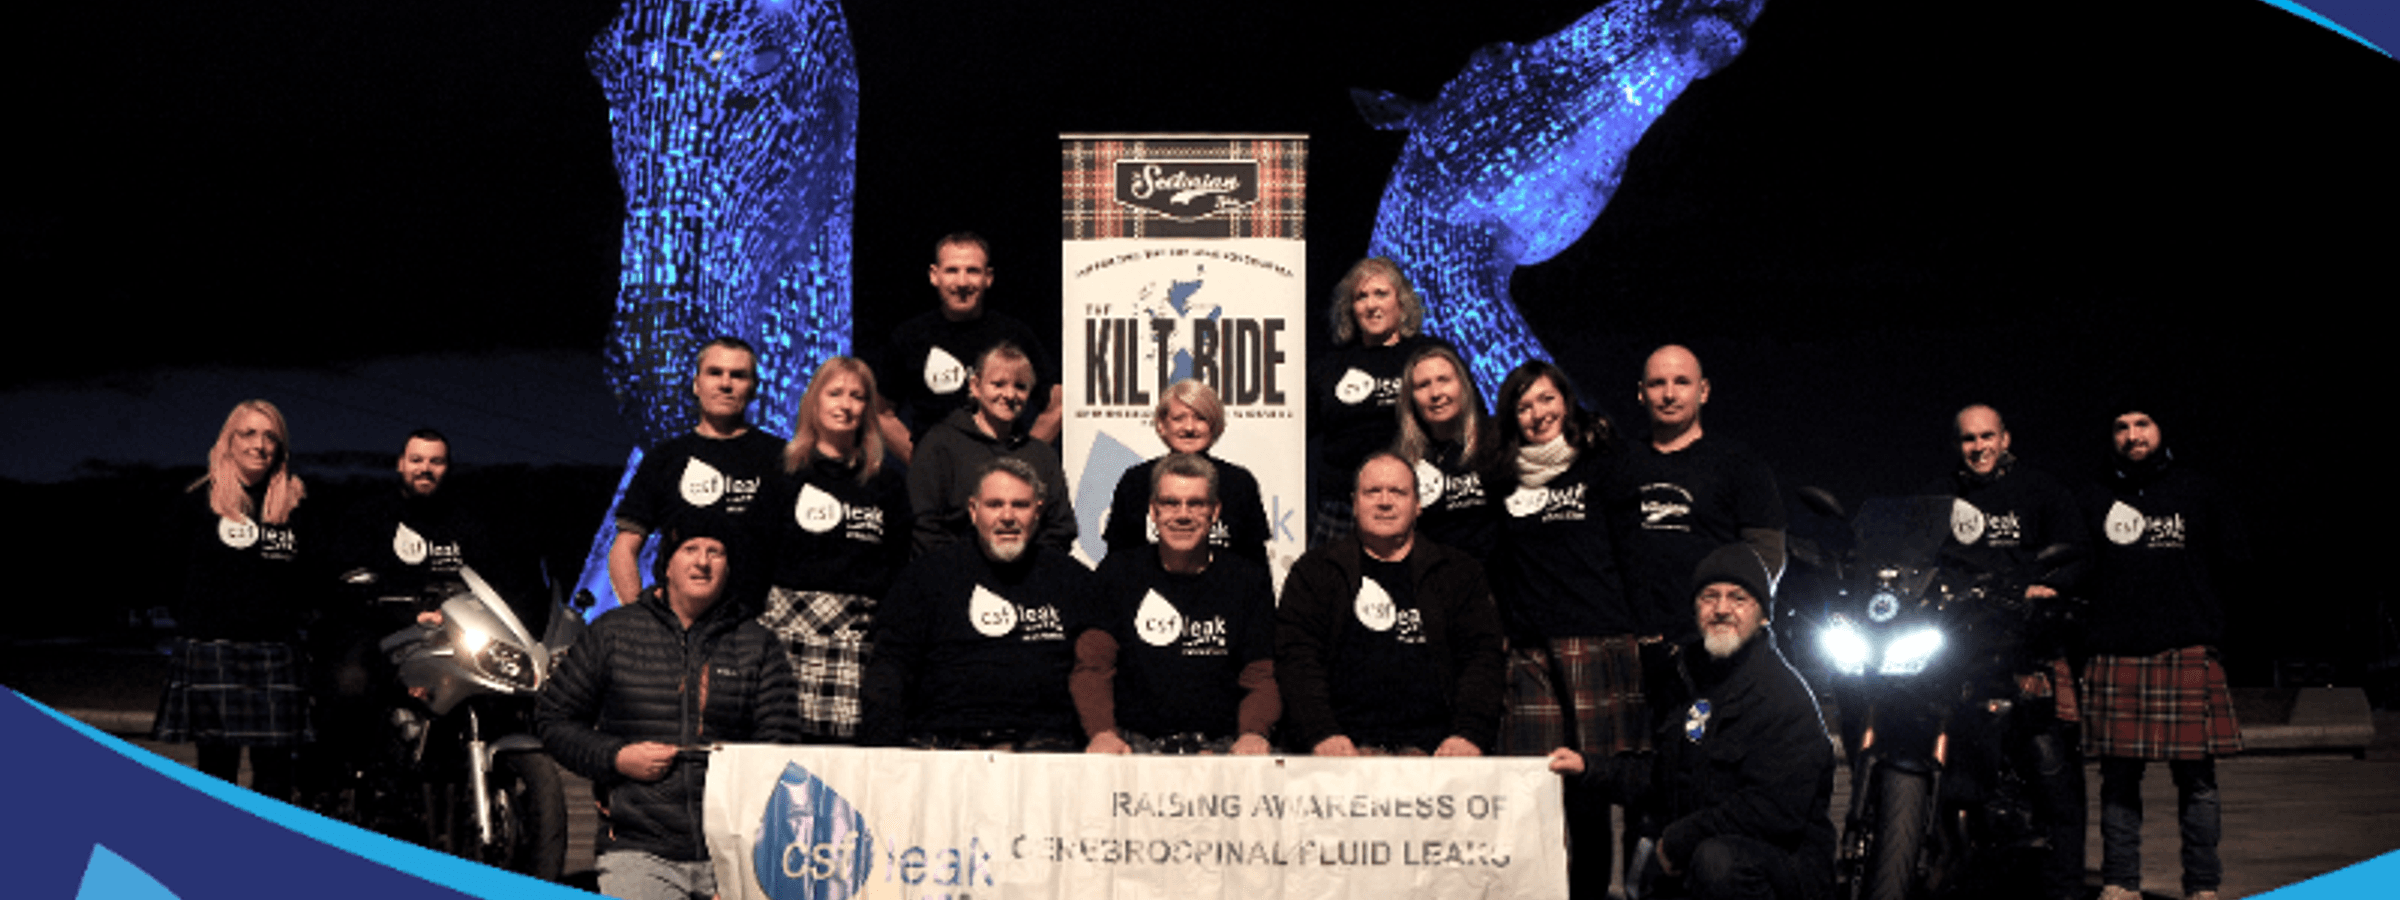 A group of people at the Kilt Ride event wearing CSF Leak Association shirts and holding a banner.